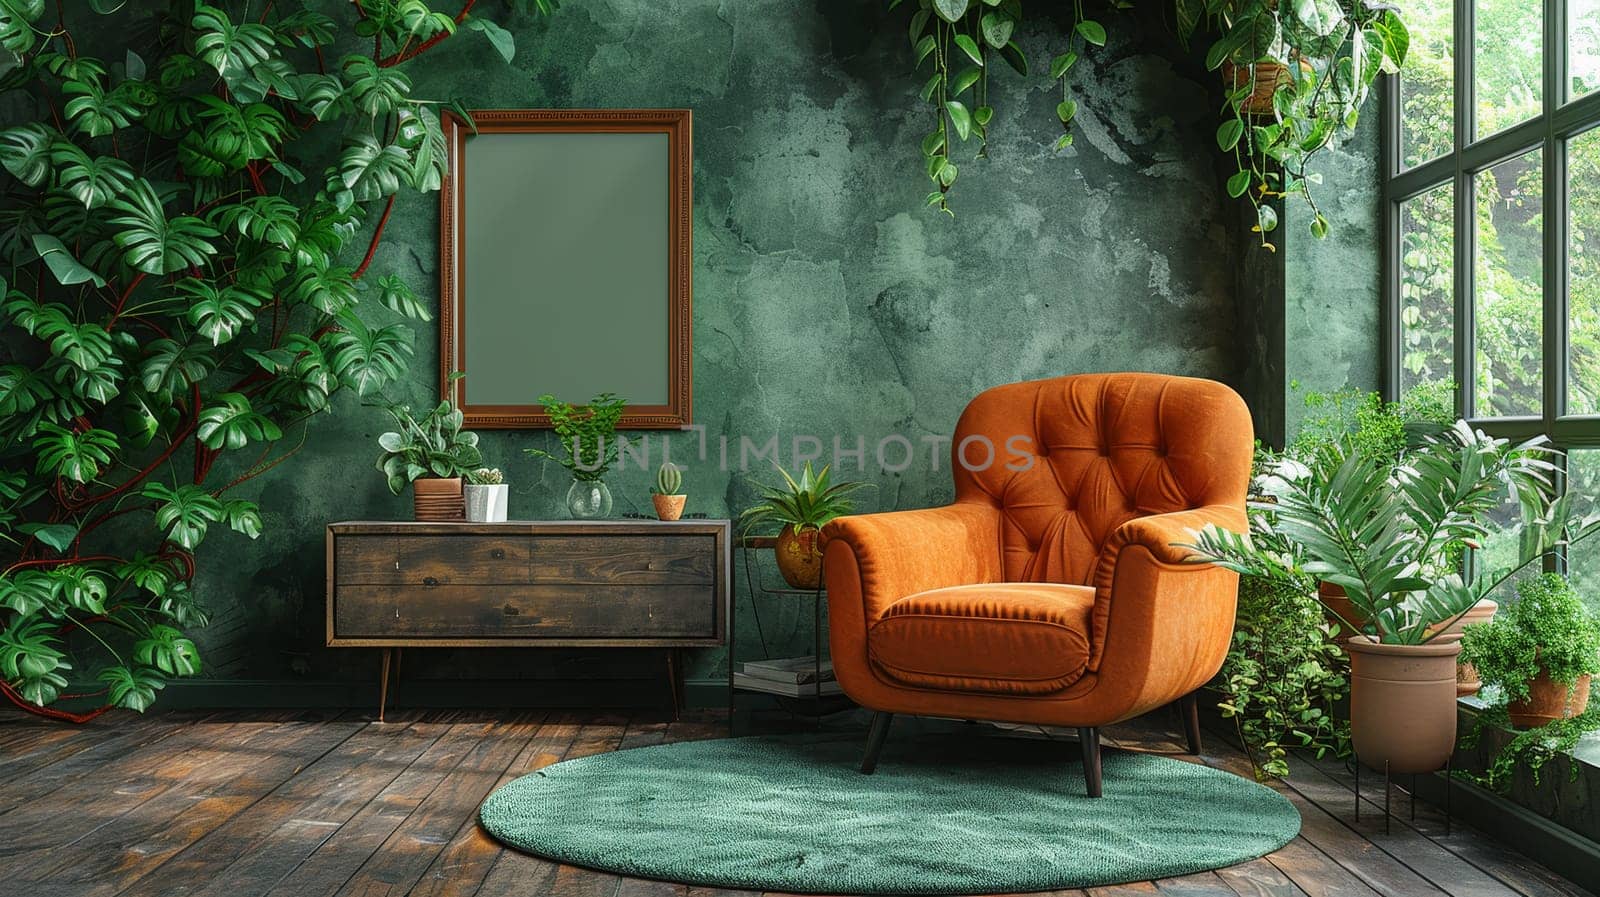 The living room is designed elegantly with a mockup poster frame, a modern frotte armchair, a wooden commode, and stylish accessories. There is also a green eucalyptus wall adjacent to the room. A